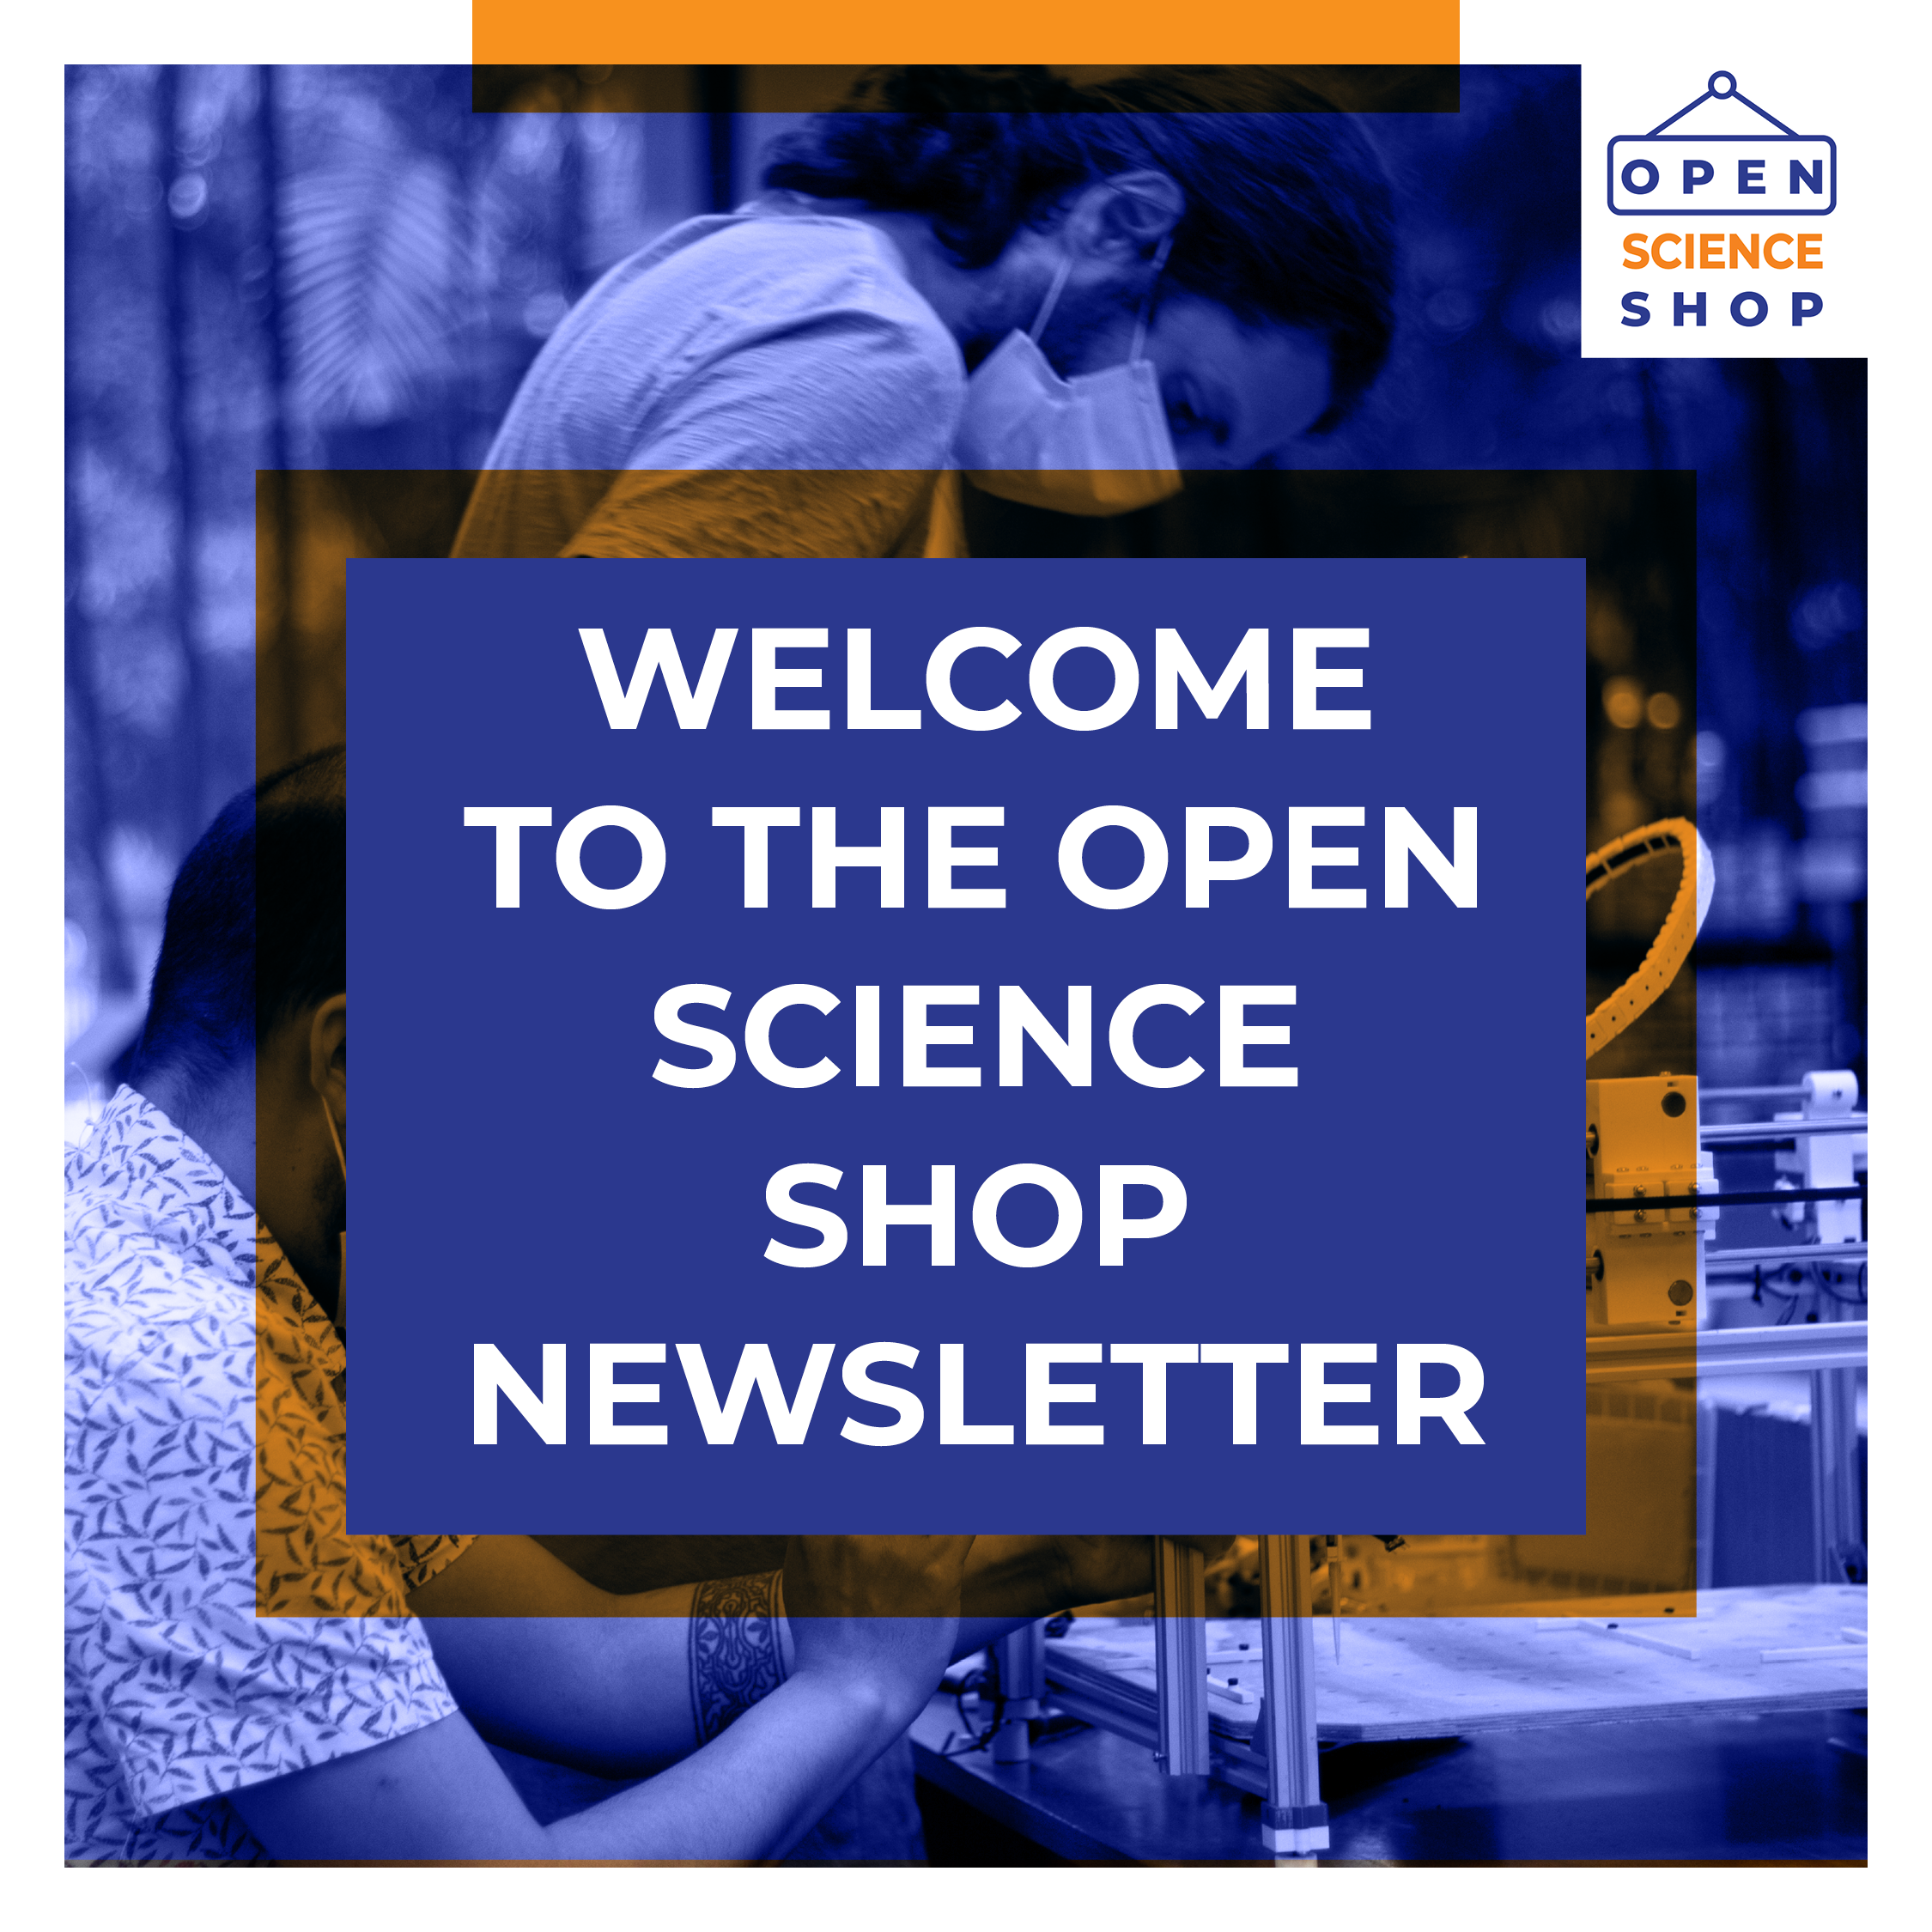 Welcome to the Open Science Shop Newsletter